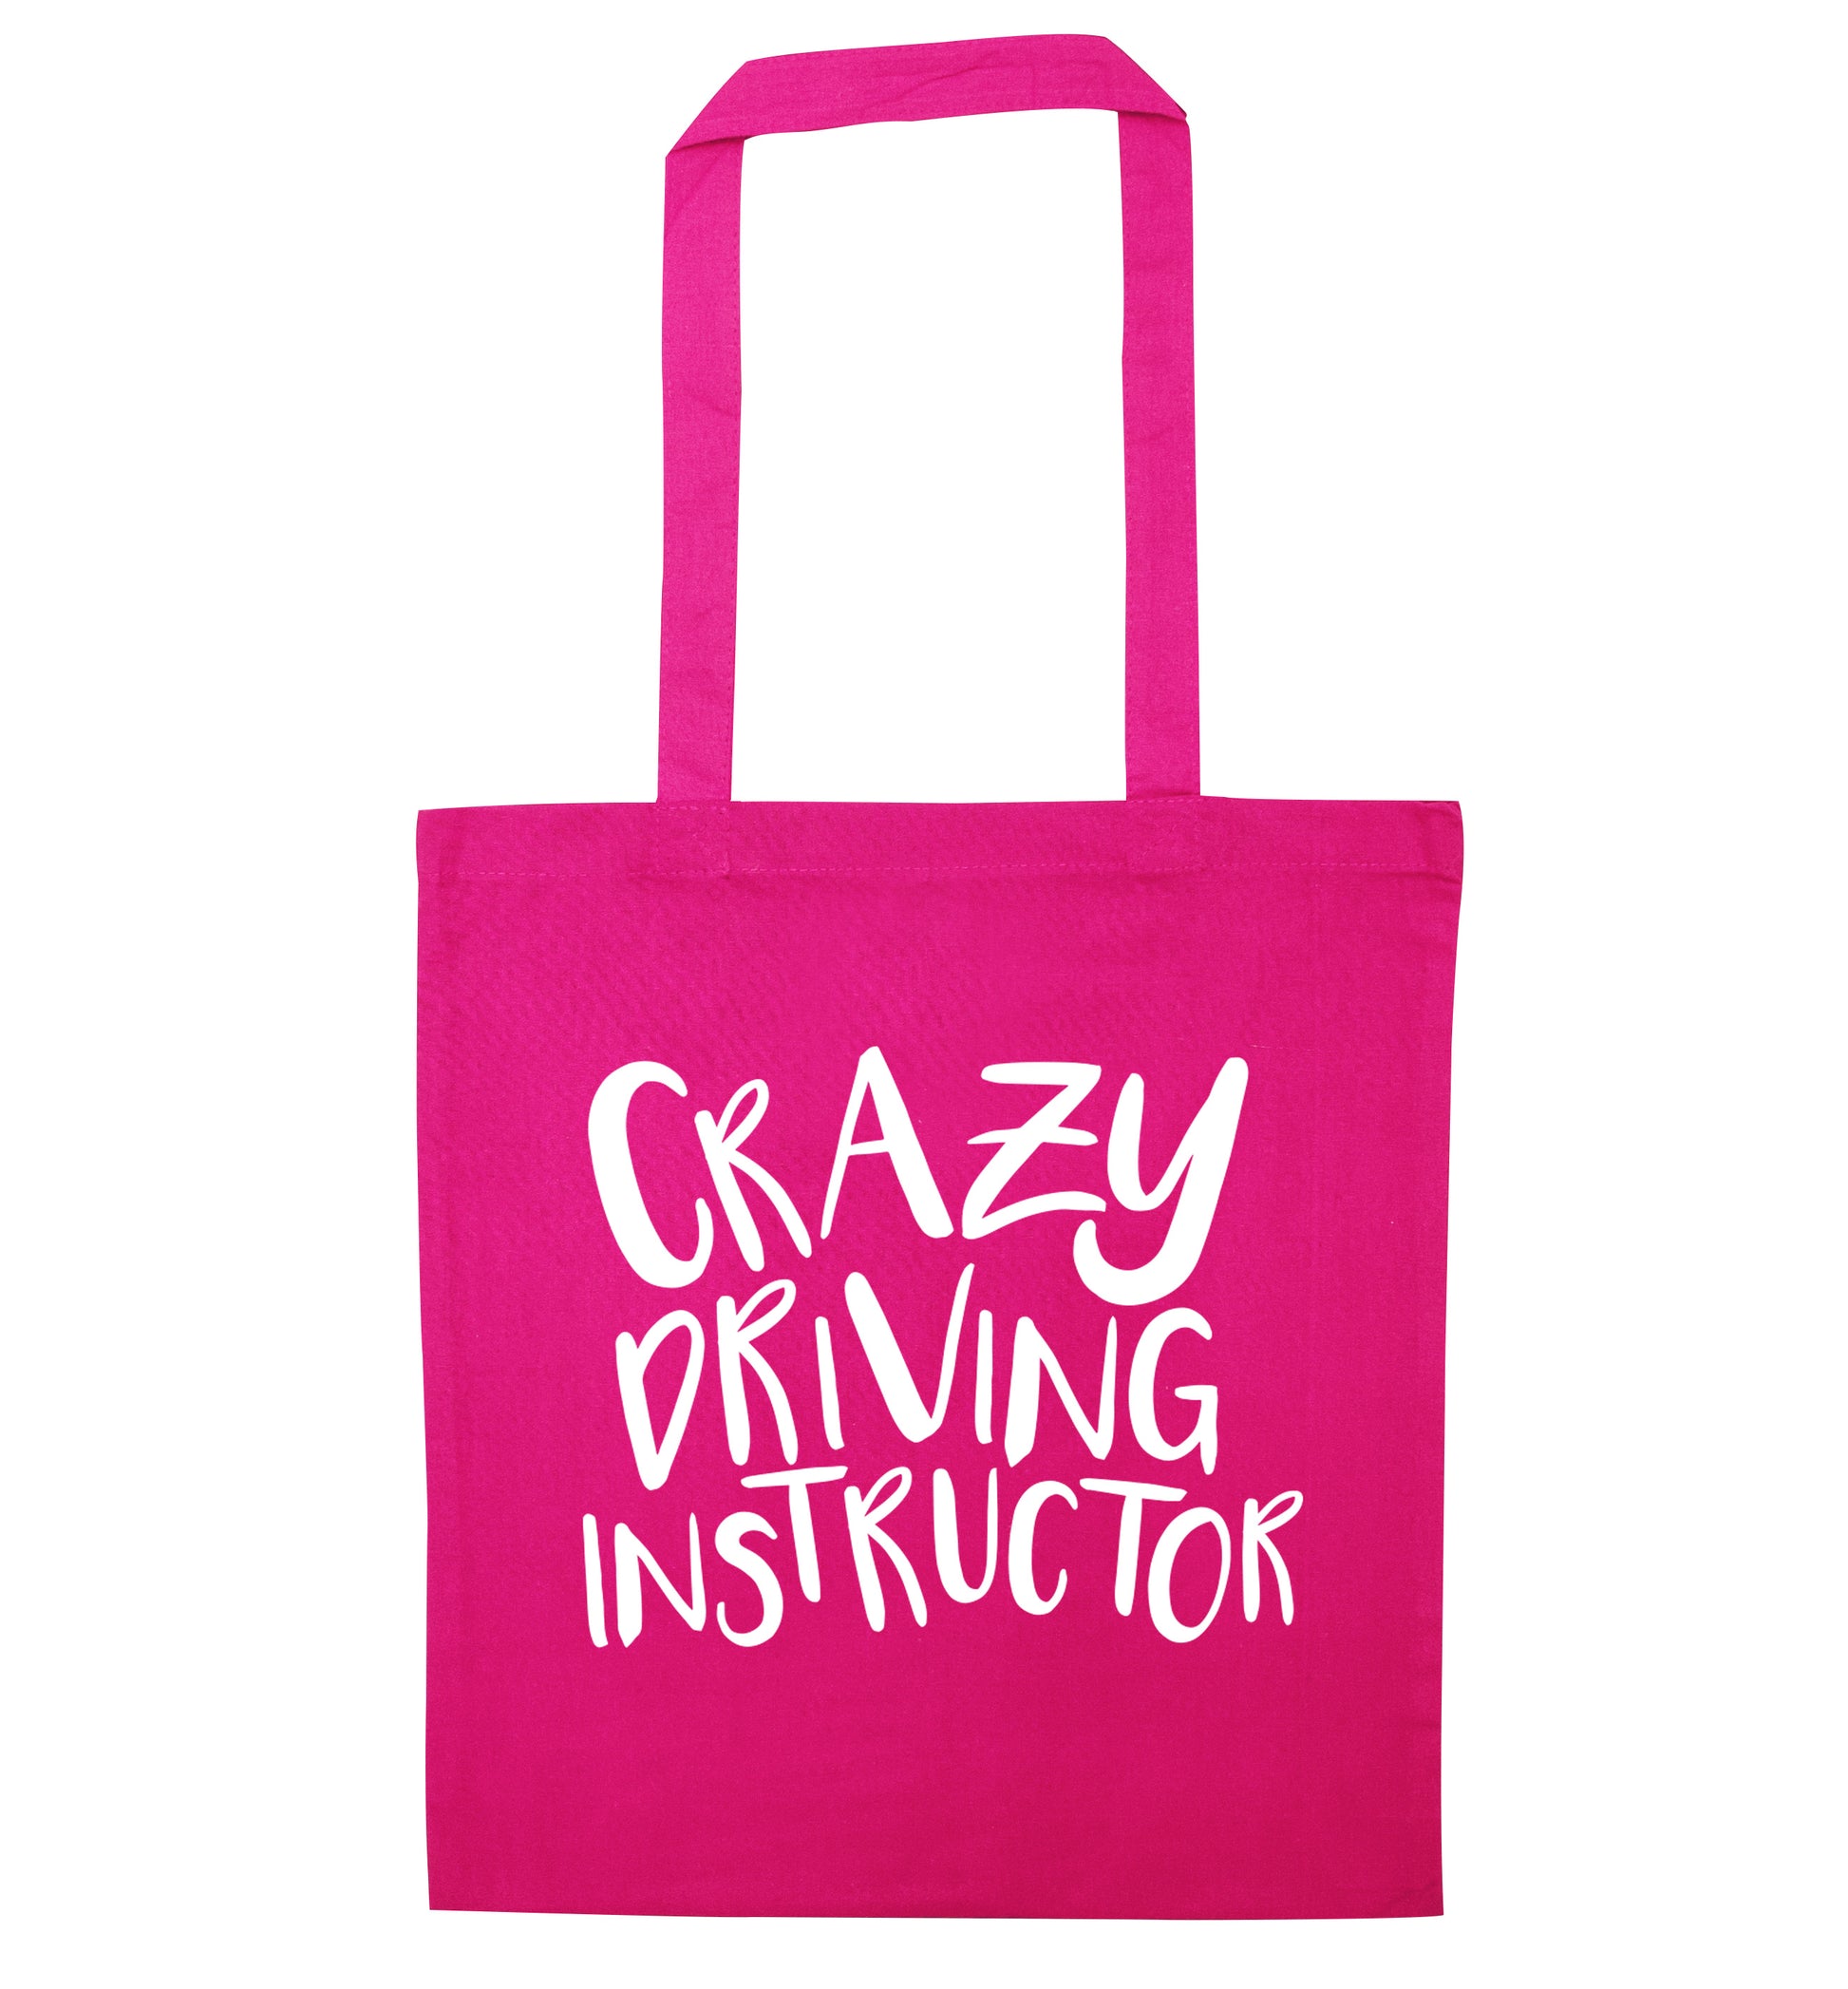 Crazy driving instructor pink tote bag